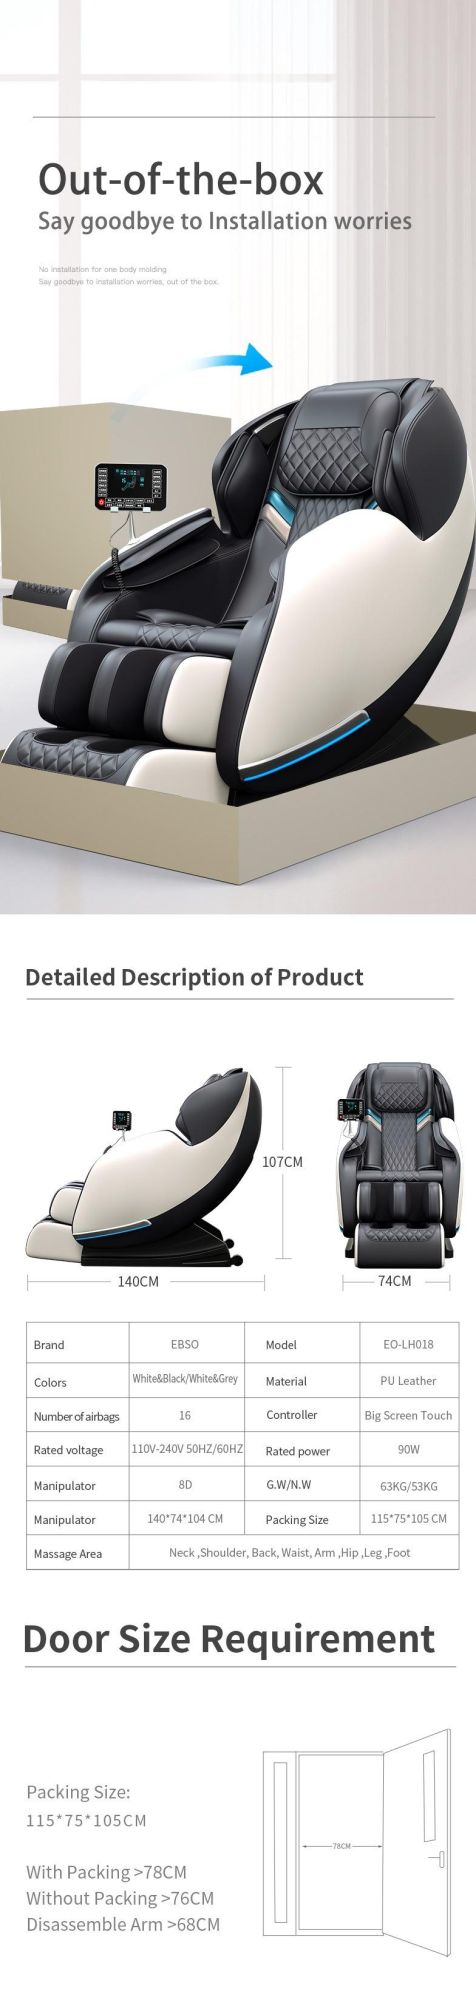 Promotional High Quality Long Duration Time 3D Cheap Price Massage Chair 1800b